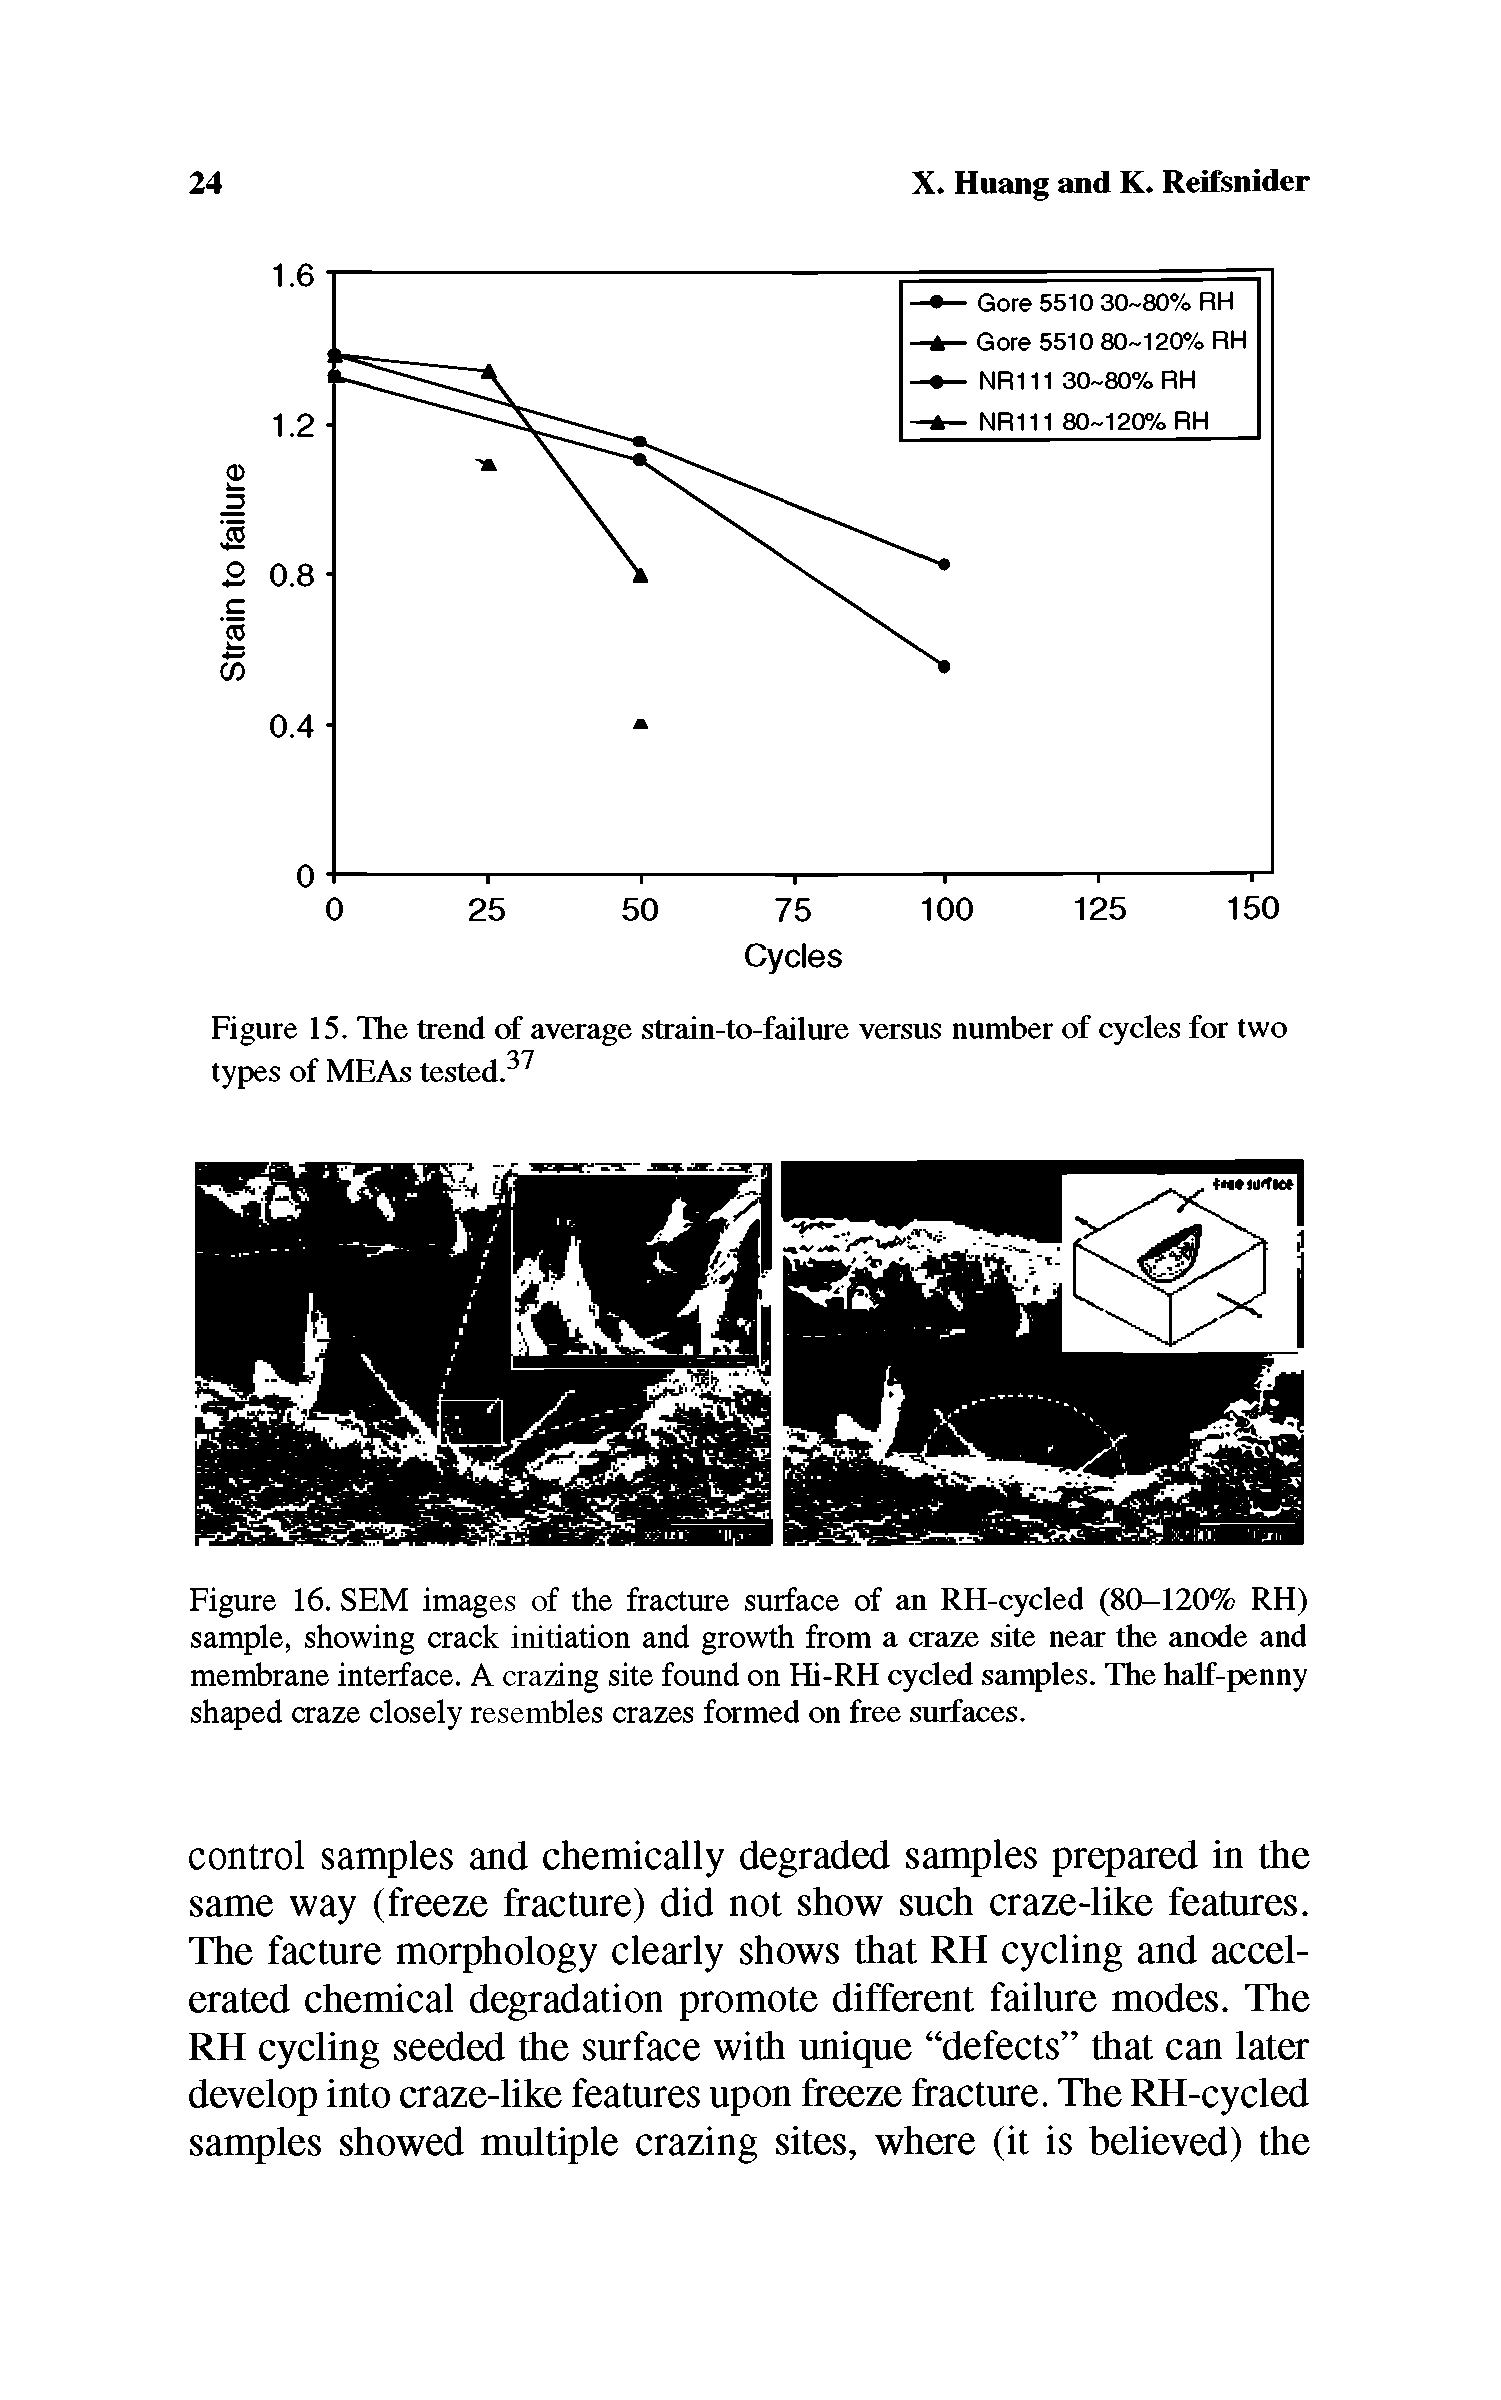 Figure 16. SEM images of the fracture surface of an RH-cycled (80-120% RH) sample, showing crack initiation and growth from a craze site near the anode and membrane interface. A crazing site found on Hi-RH cycled samples. The half-penny shaped craze closely resembles crazes formed on free surfaces.